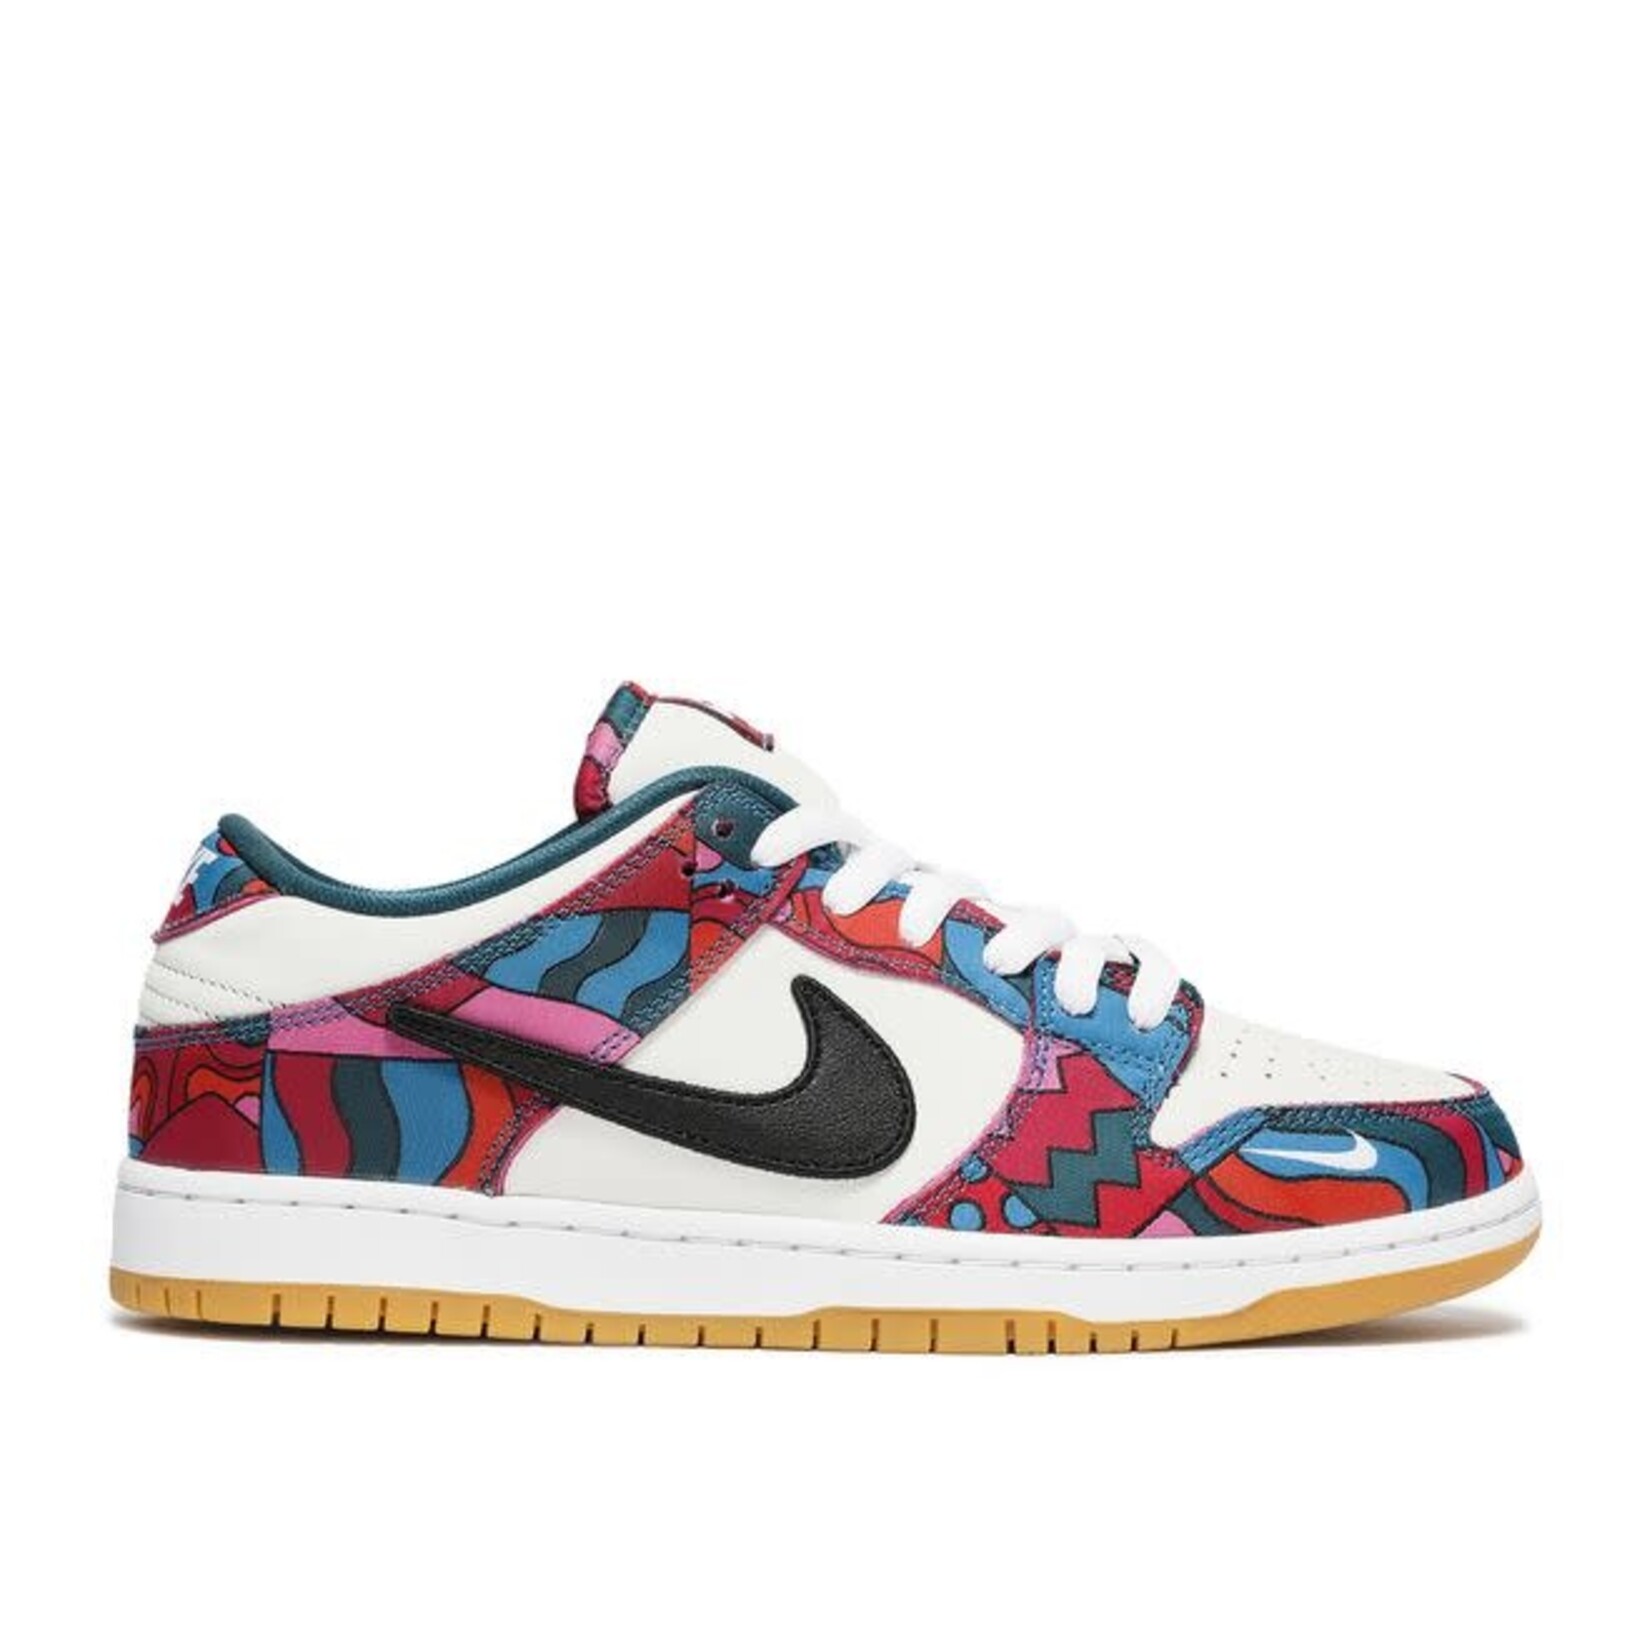 Nike Nike SB Dunk Low Pro Parra Abstract Art (2021) Size 13, DS BRAND NEW